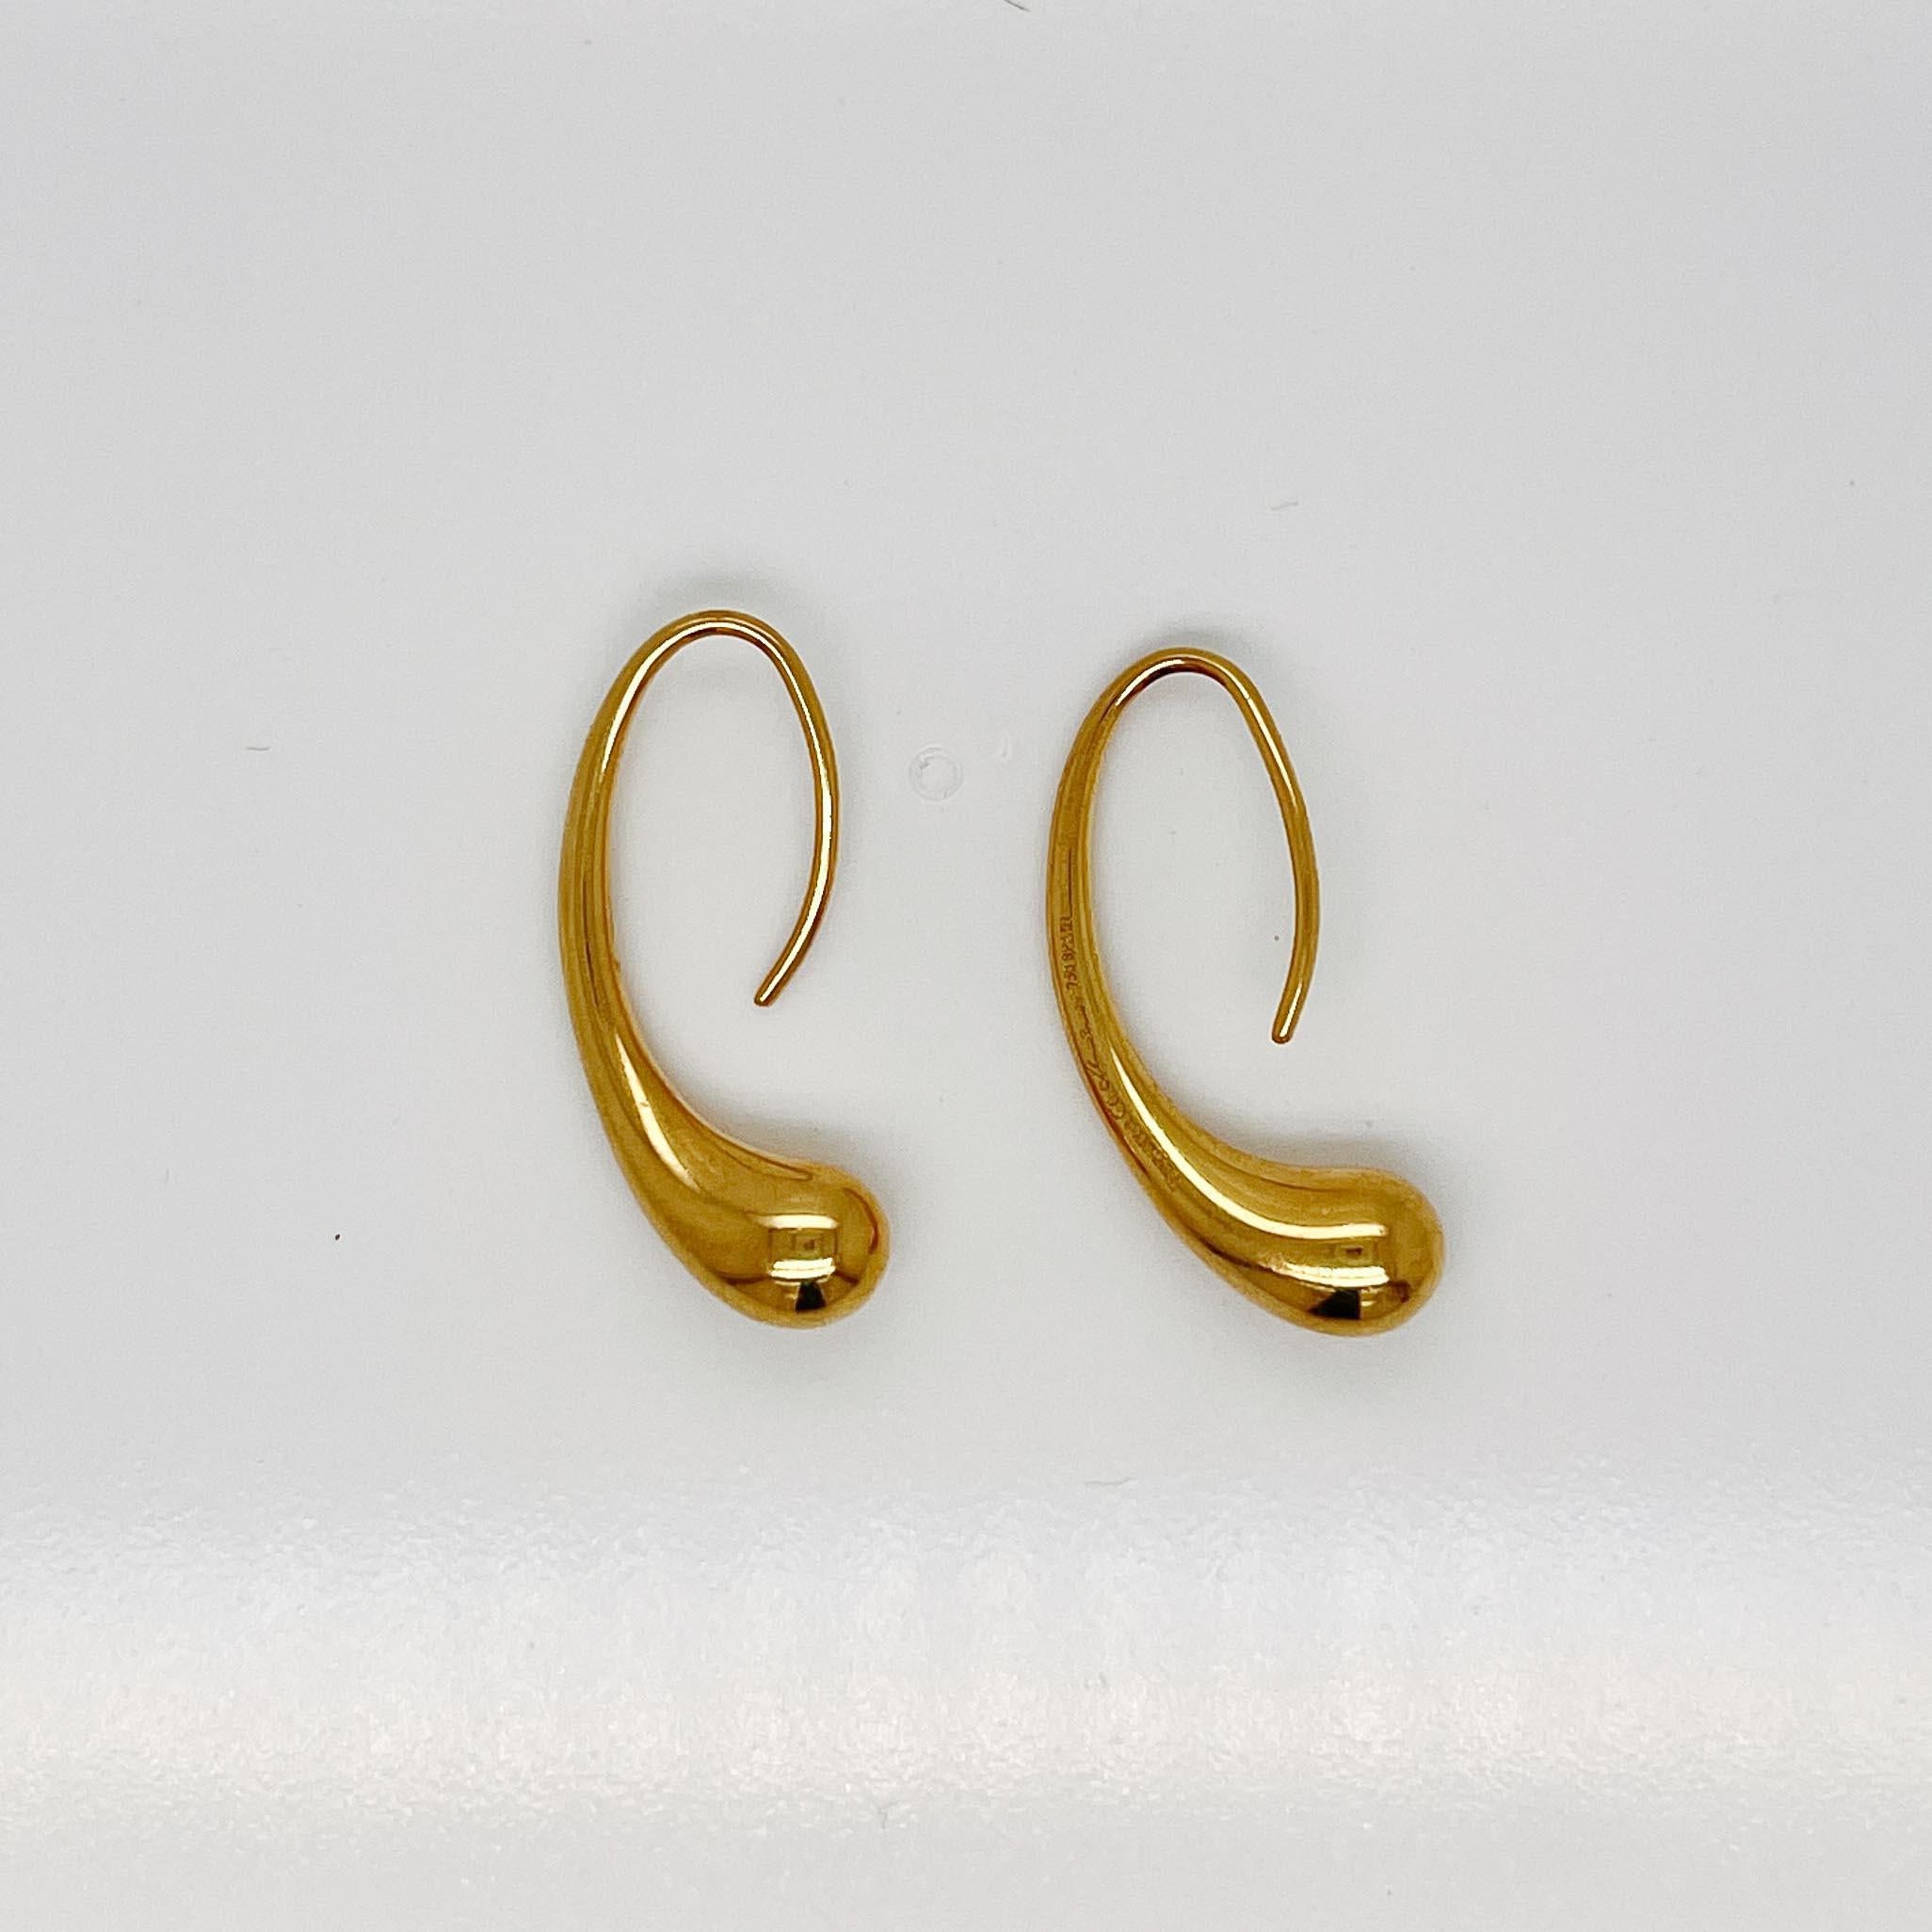 A fine pair of Tiffany & Co. teardrop earrings.

In 18 karat yellow gold. 

By Elsa Peretti.

Simply a fabulous pair of Tiffany & Co. earrings! 

Date:
20th Century

Overall Condition:
They are in overall good, as-pictured, used estate condition